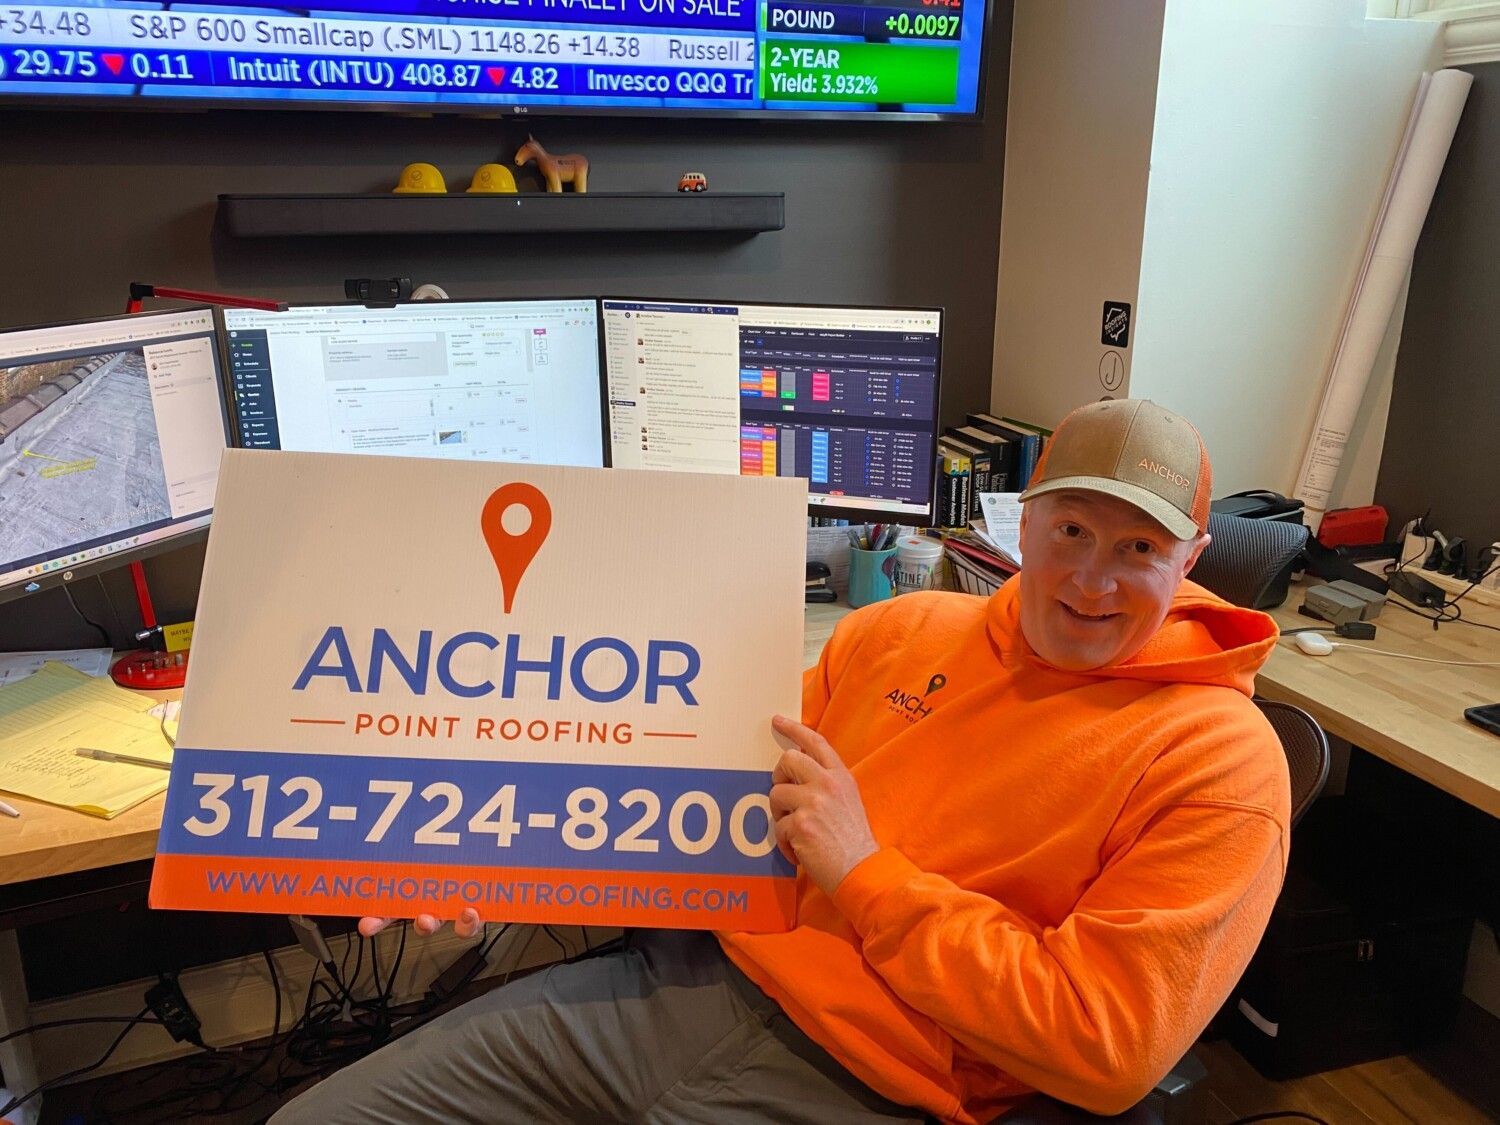 A man is sitting at a desk holding a sign that says anchor point roofing.